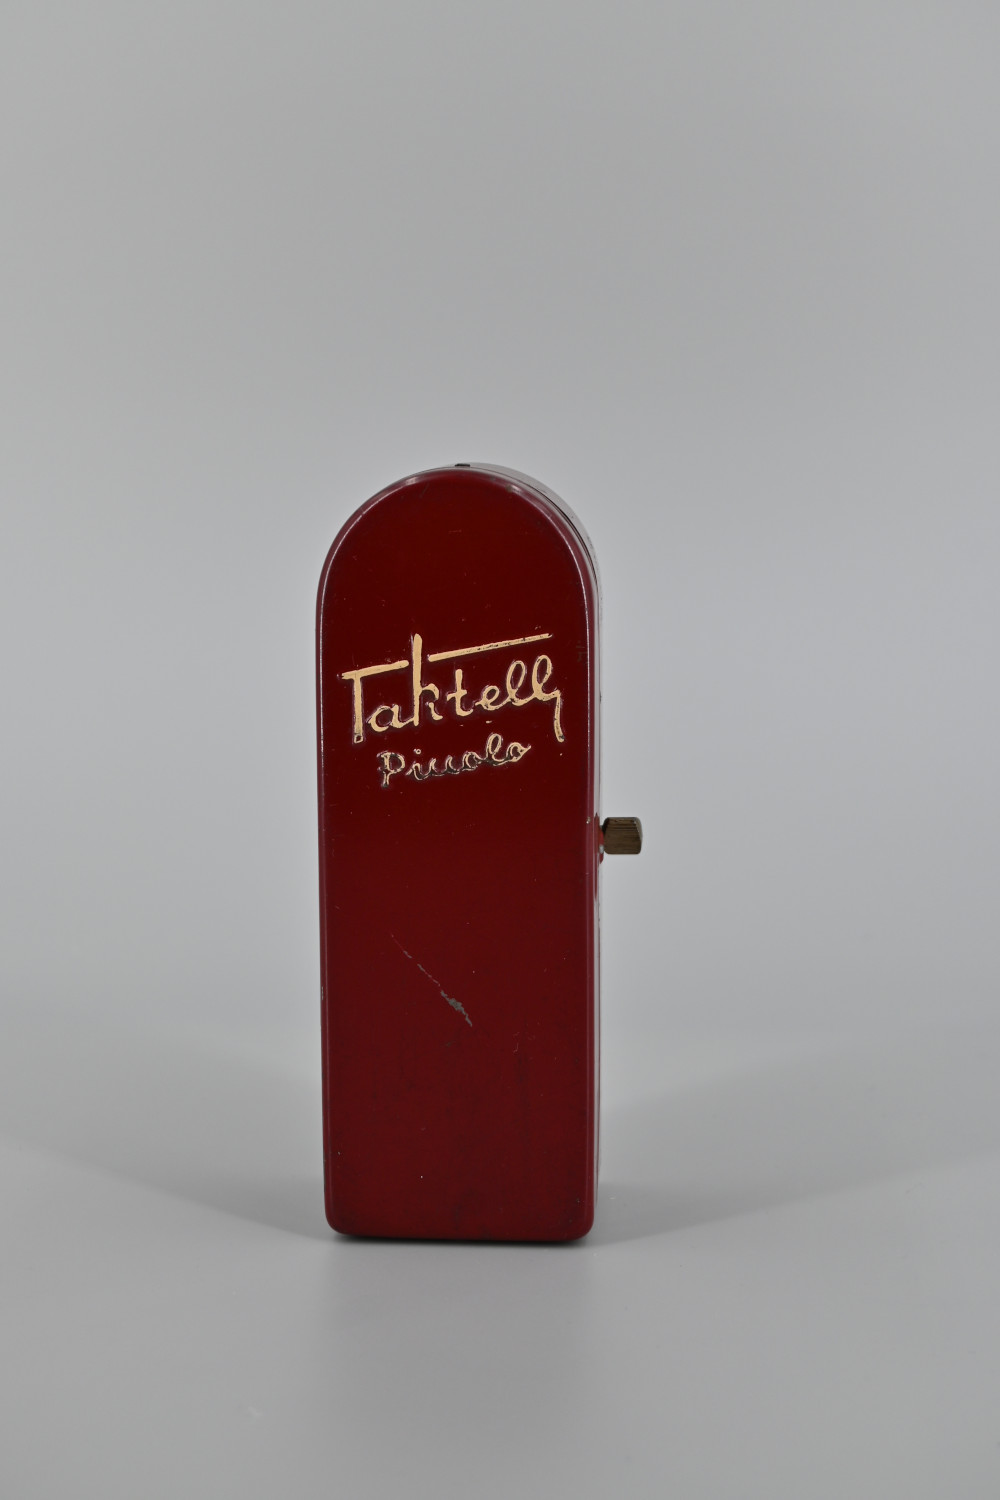 Taktell-metronome-VM-collectables2